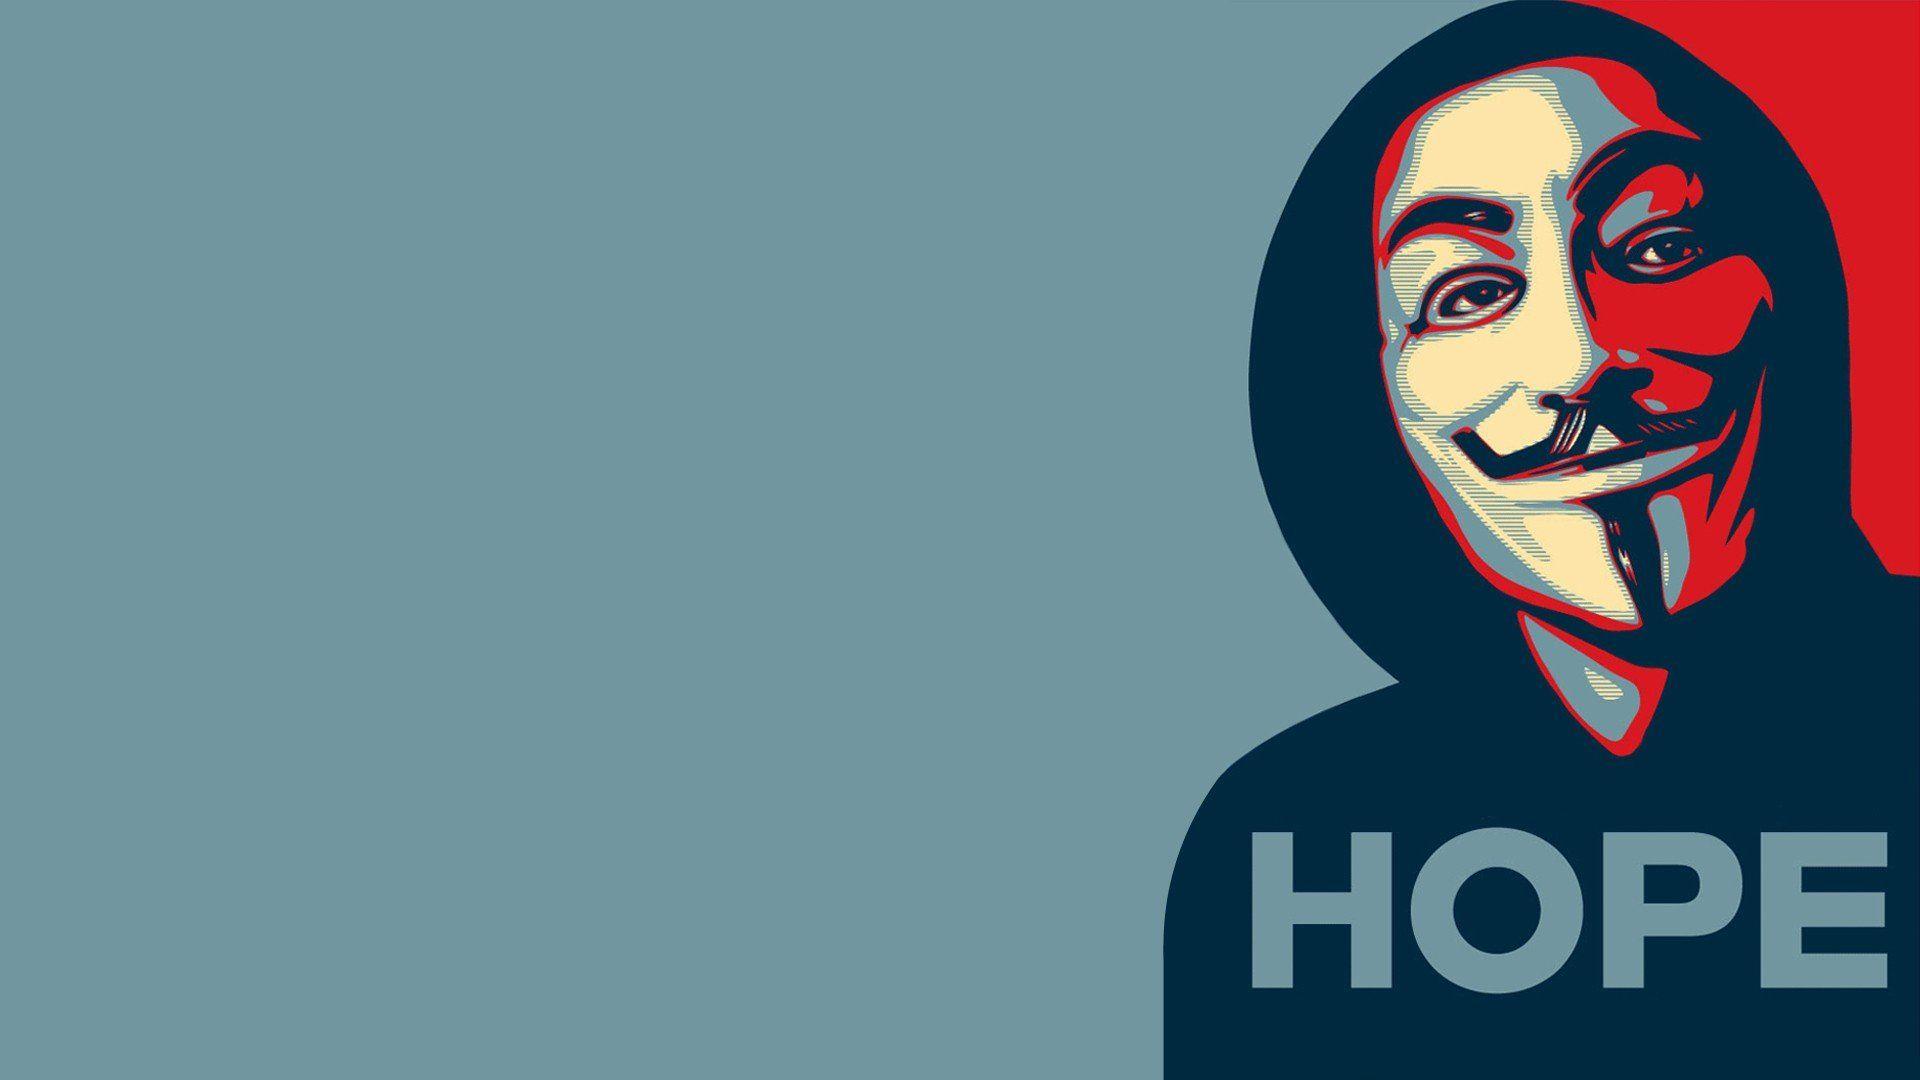 Anonymous HD Wallpaper Desktop Image and Photo